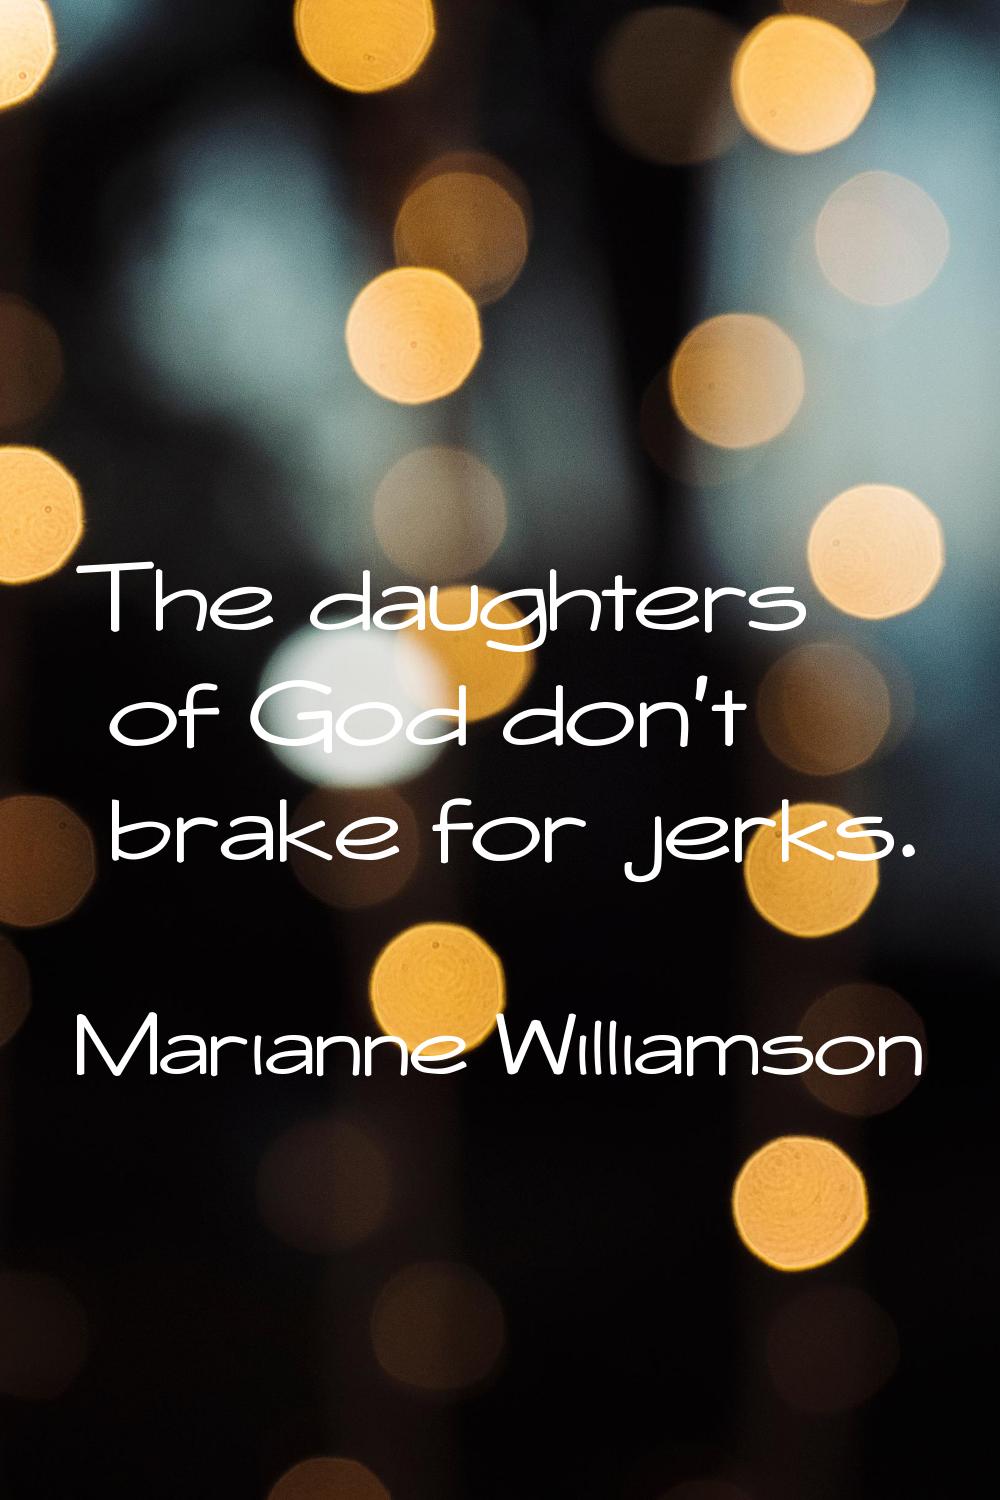 The daughters of God don't brake for jerks.